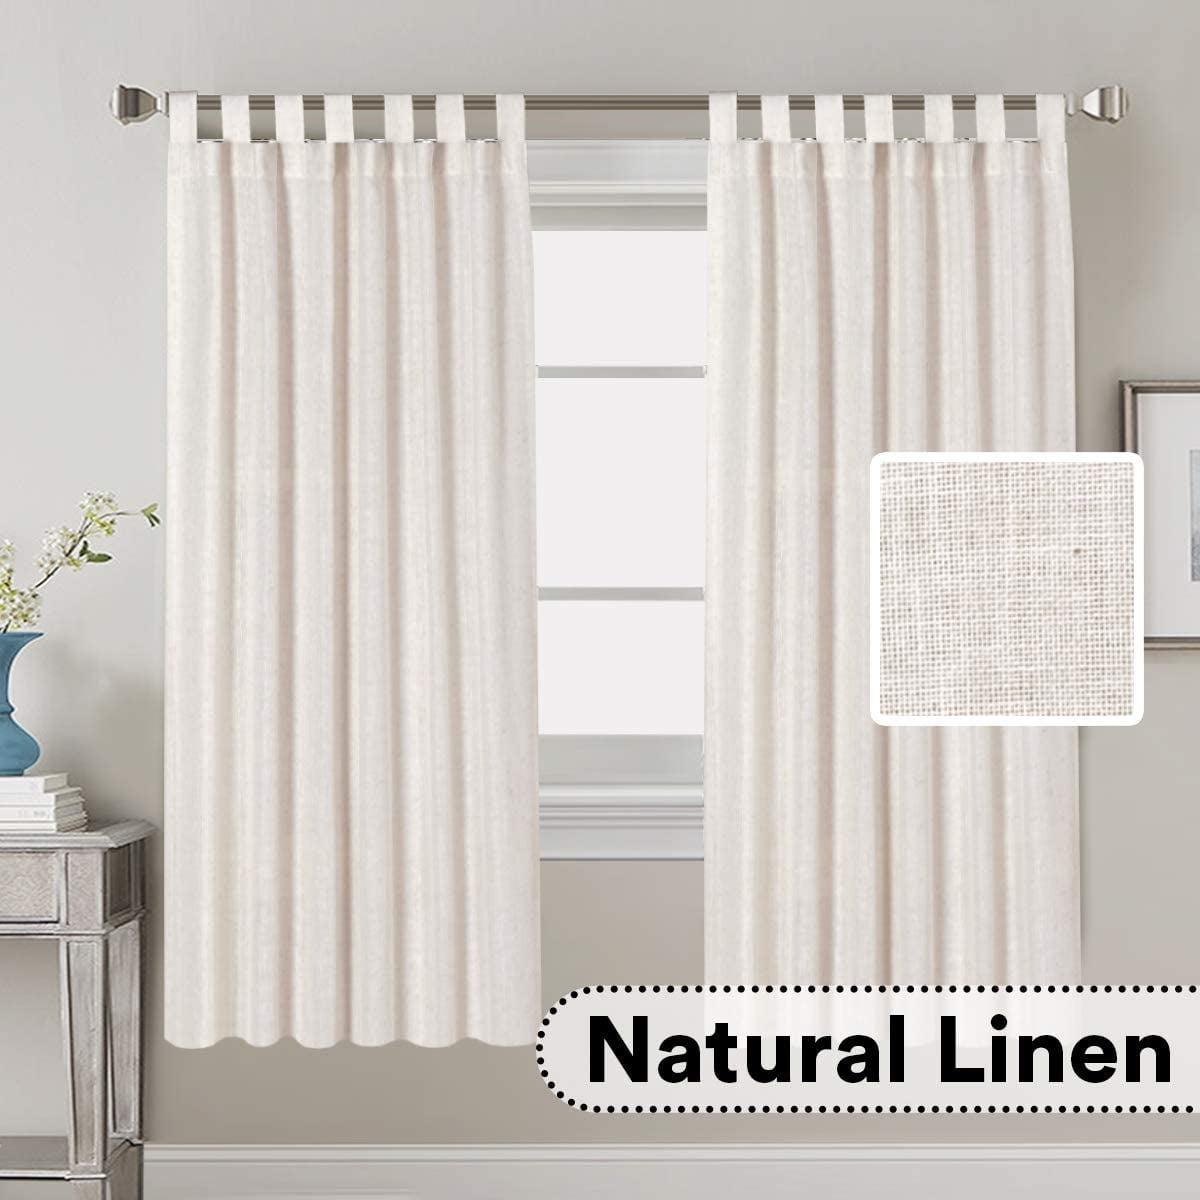 Linen Curtains Natural Linen Blended Curtains Tab Top Window Treatments